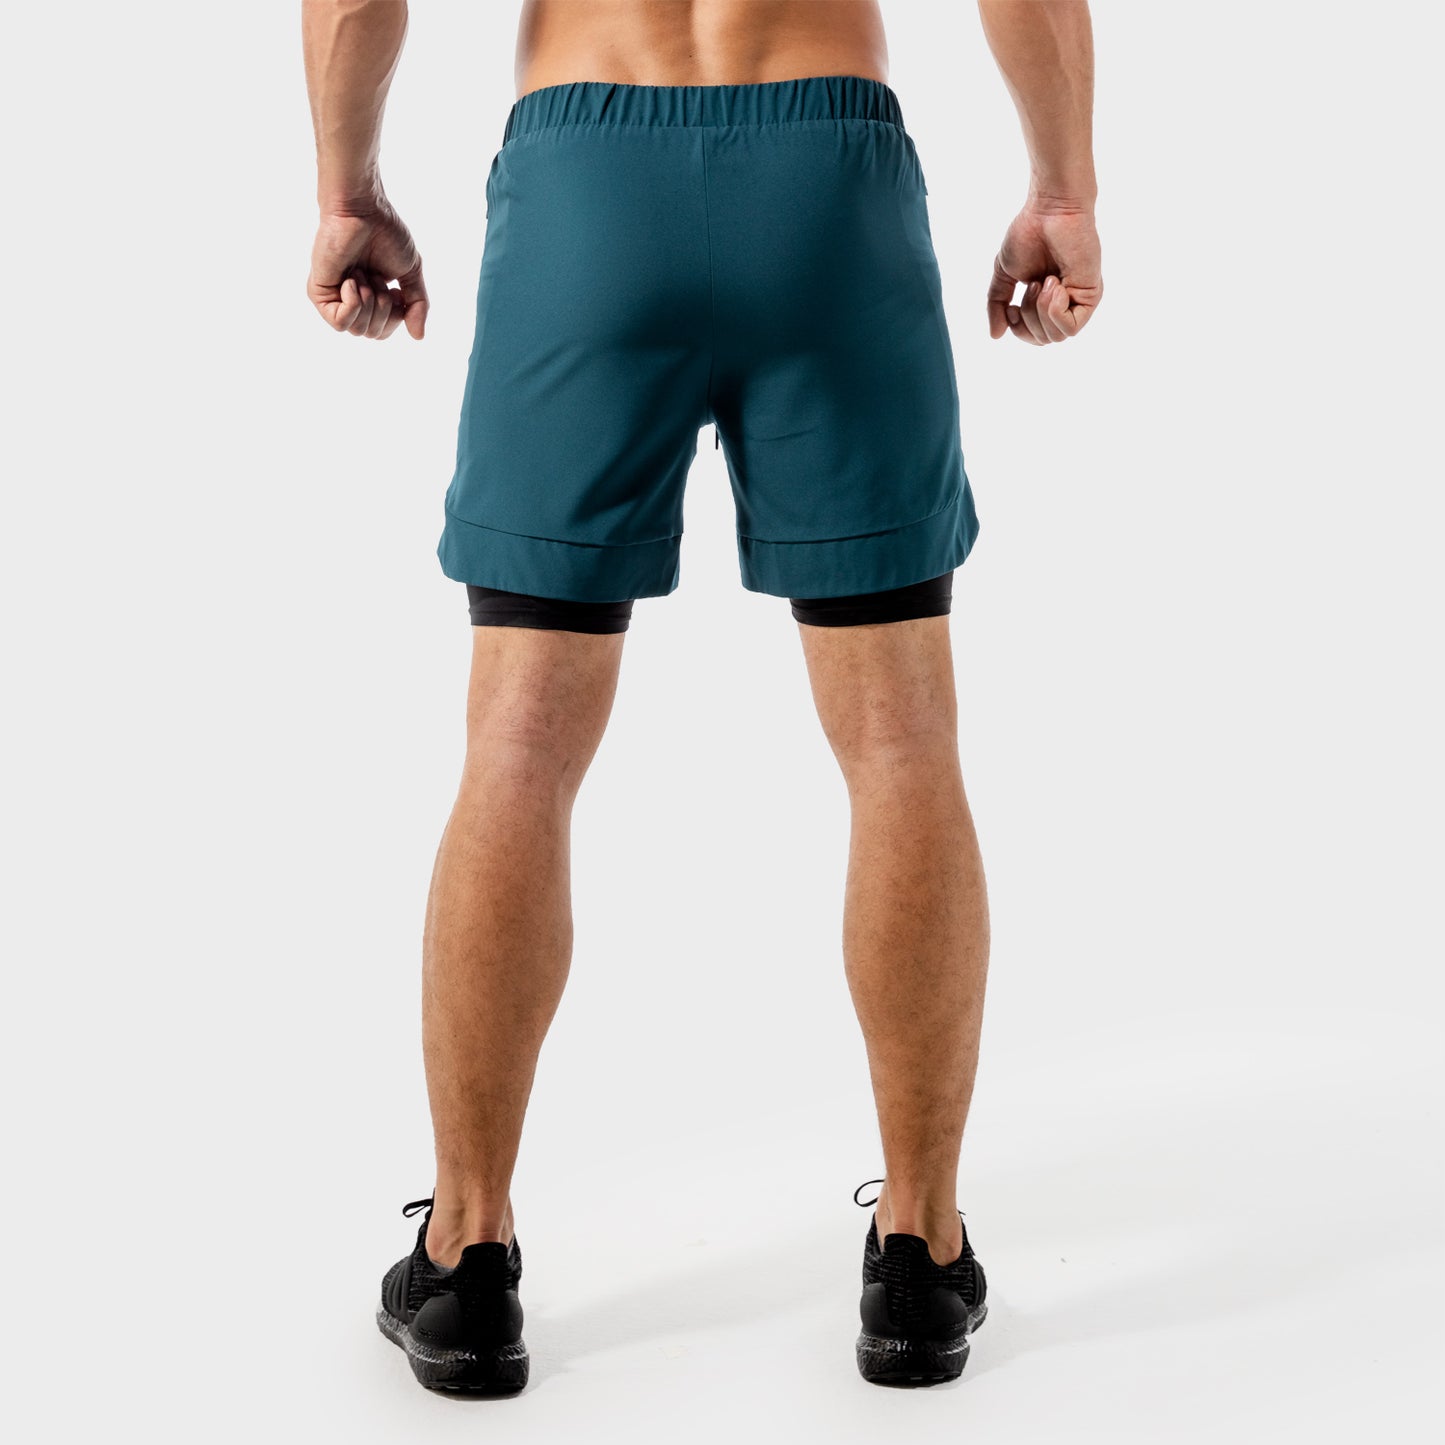 CA, Limitless 2-in-1 Shorts - Taupe, Gym Shorts Men